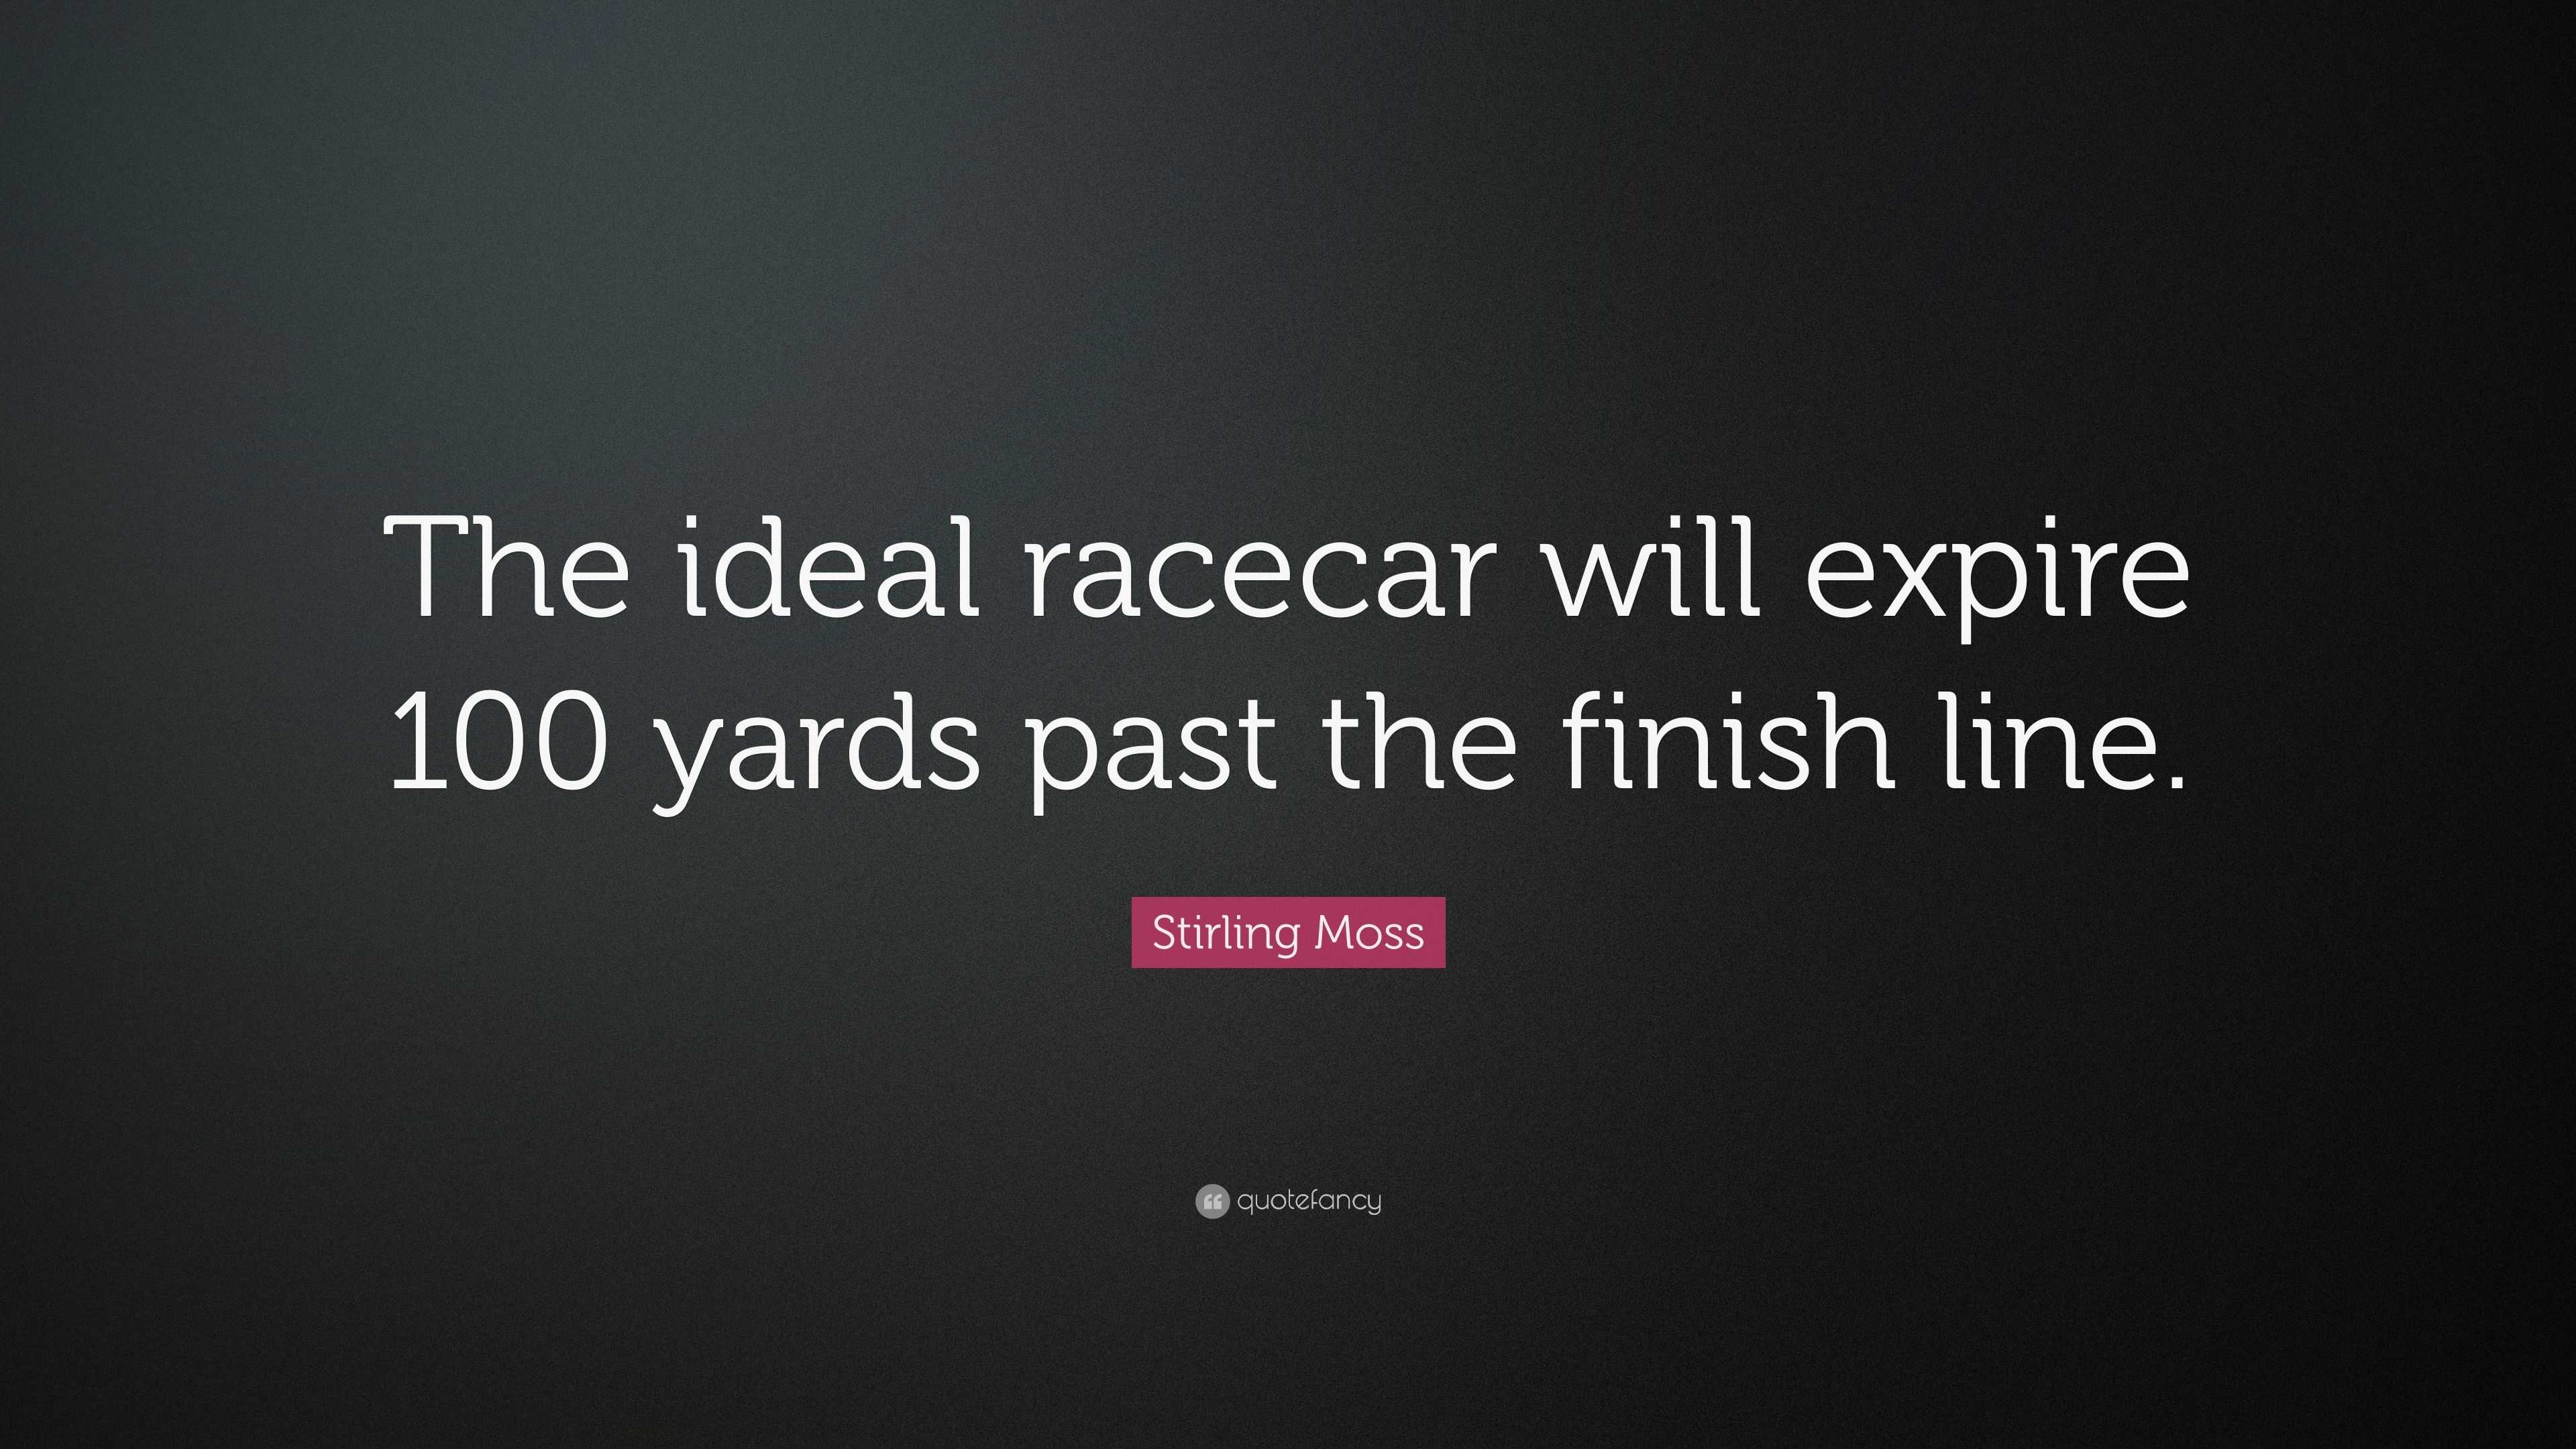 Stirling Moss Quote: “The ideal racecar will expire 100 yards past the ...